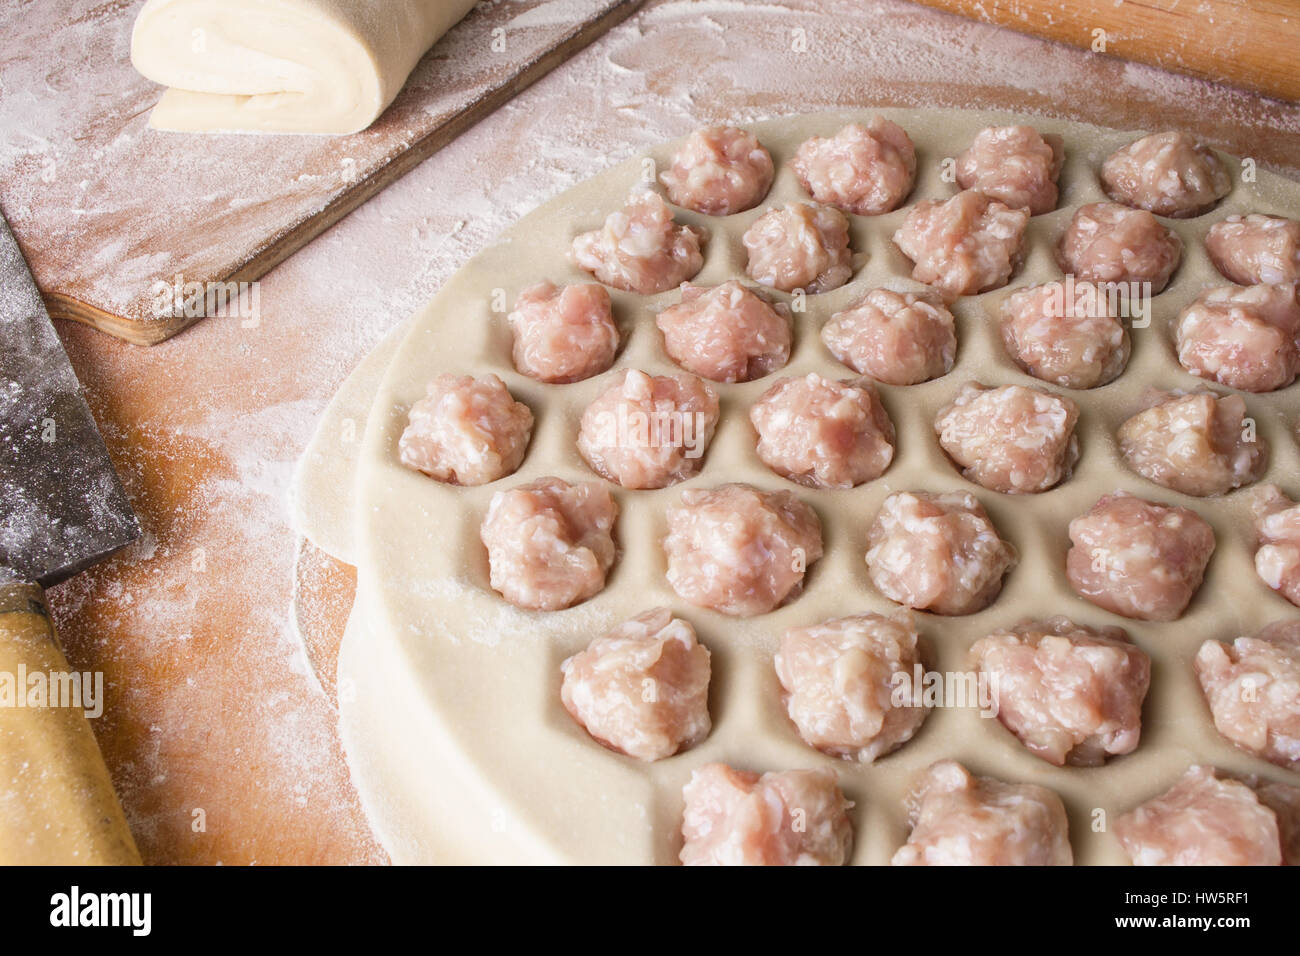 Step by step process of making home-made dumplings, ravioli or pelmeni with minced meat filling using ravioli mold or ravioli maker. Stock Photo